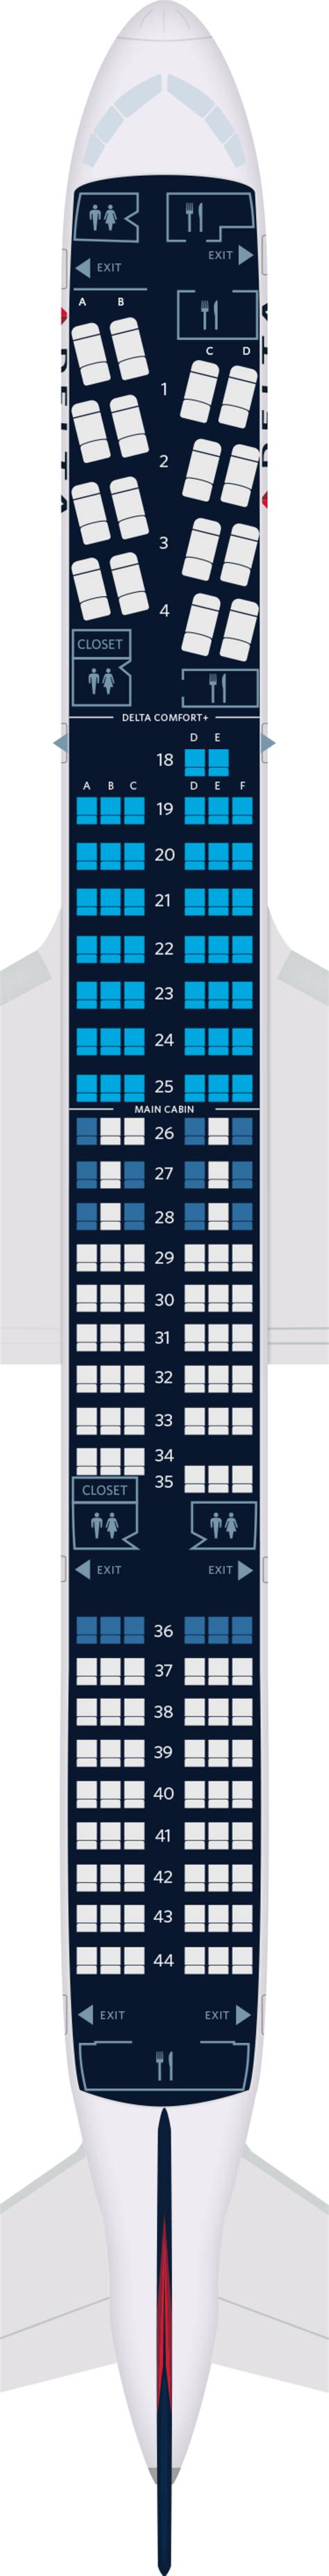 Delta Airlines Seating Chart Boeing 777 | Two Birds Home